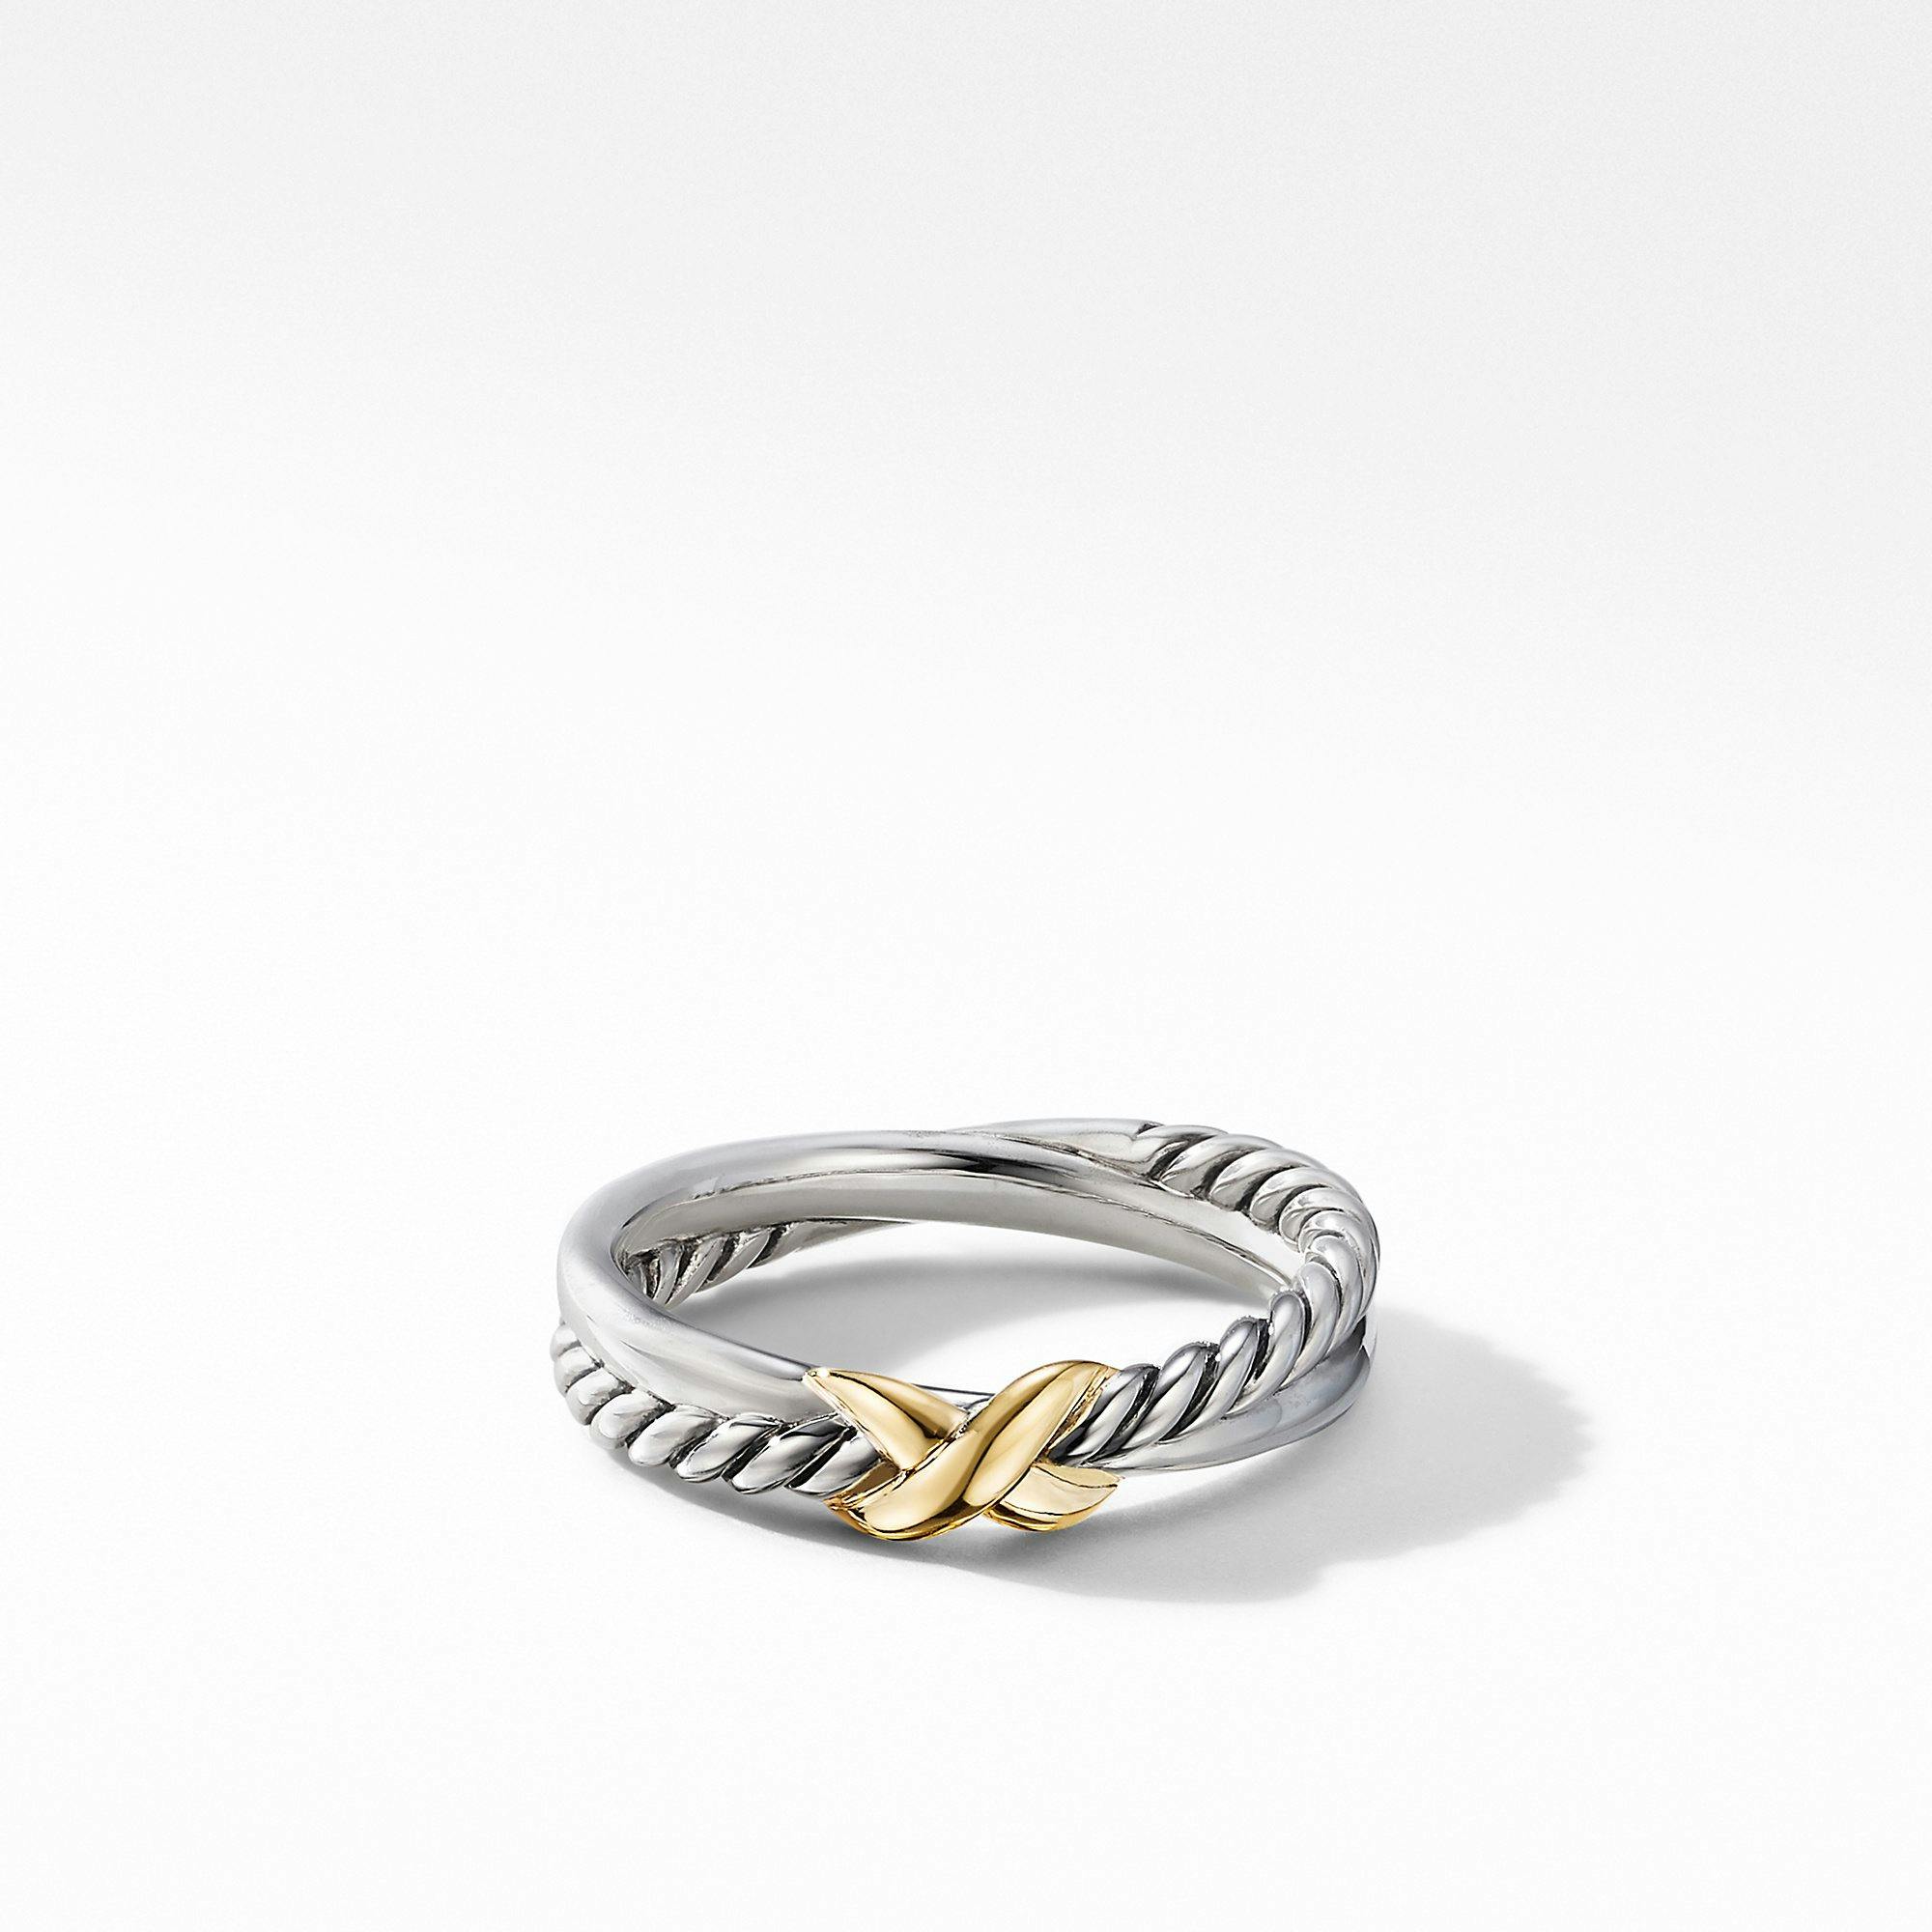 David Yurman Petite X Ring in Sterling Silver with 18k Yellow Gold, size 7 0